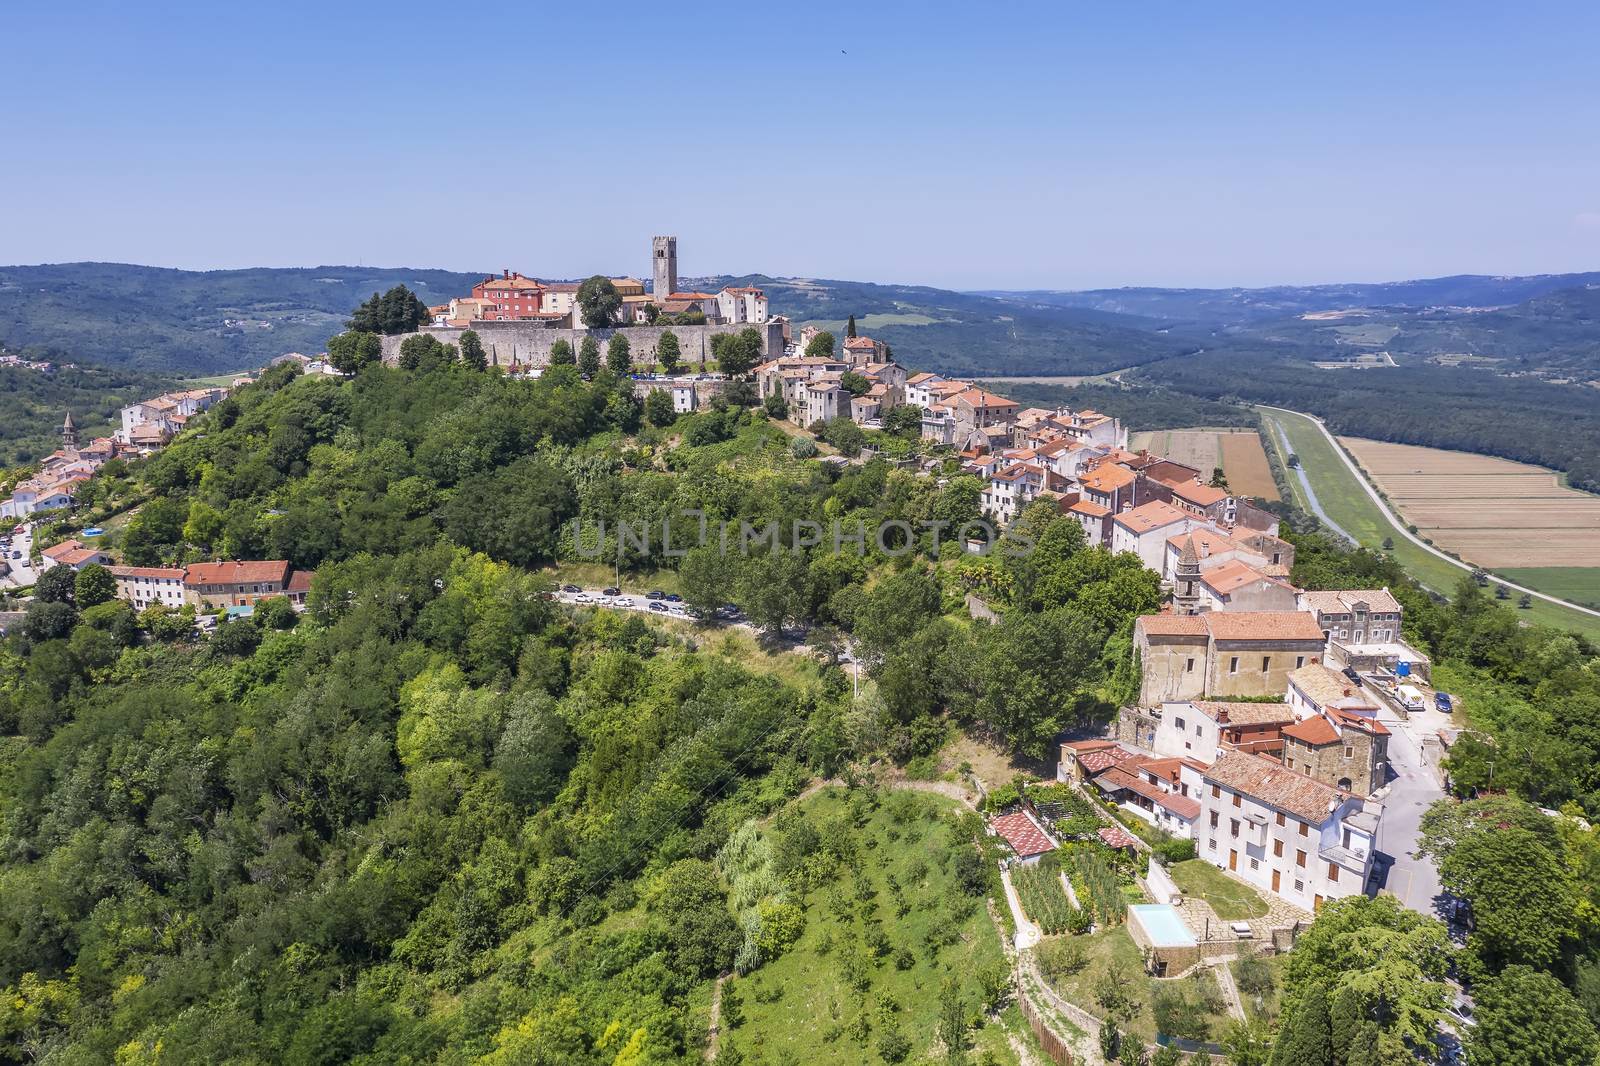 An aerial view of Motovun, Istria, Croatia by sewer12